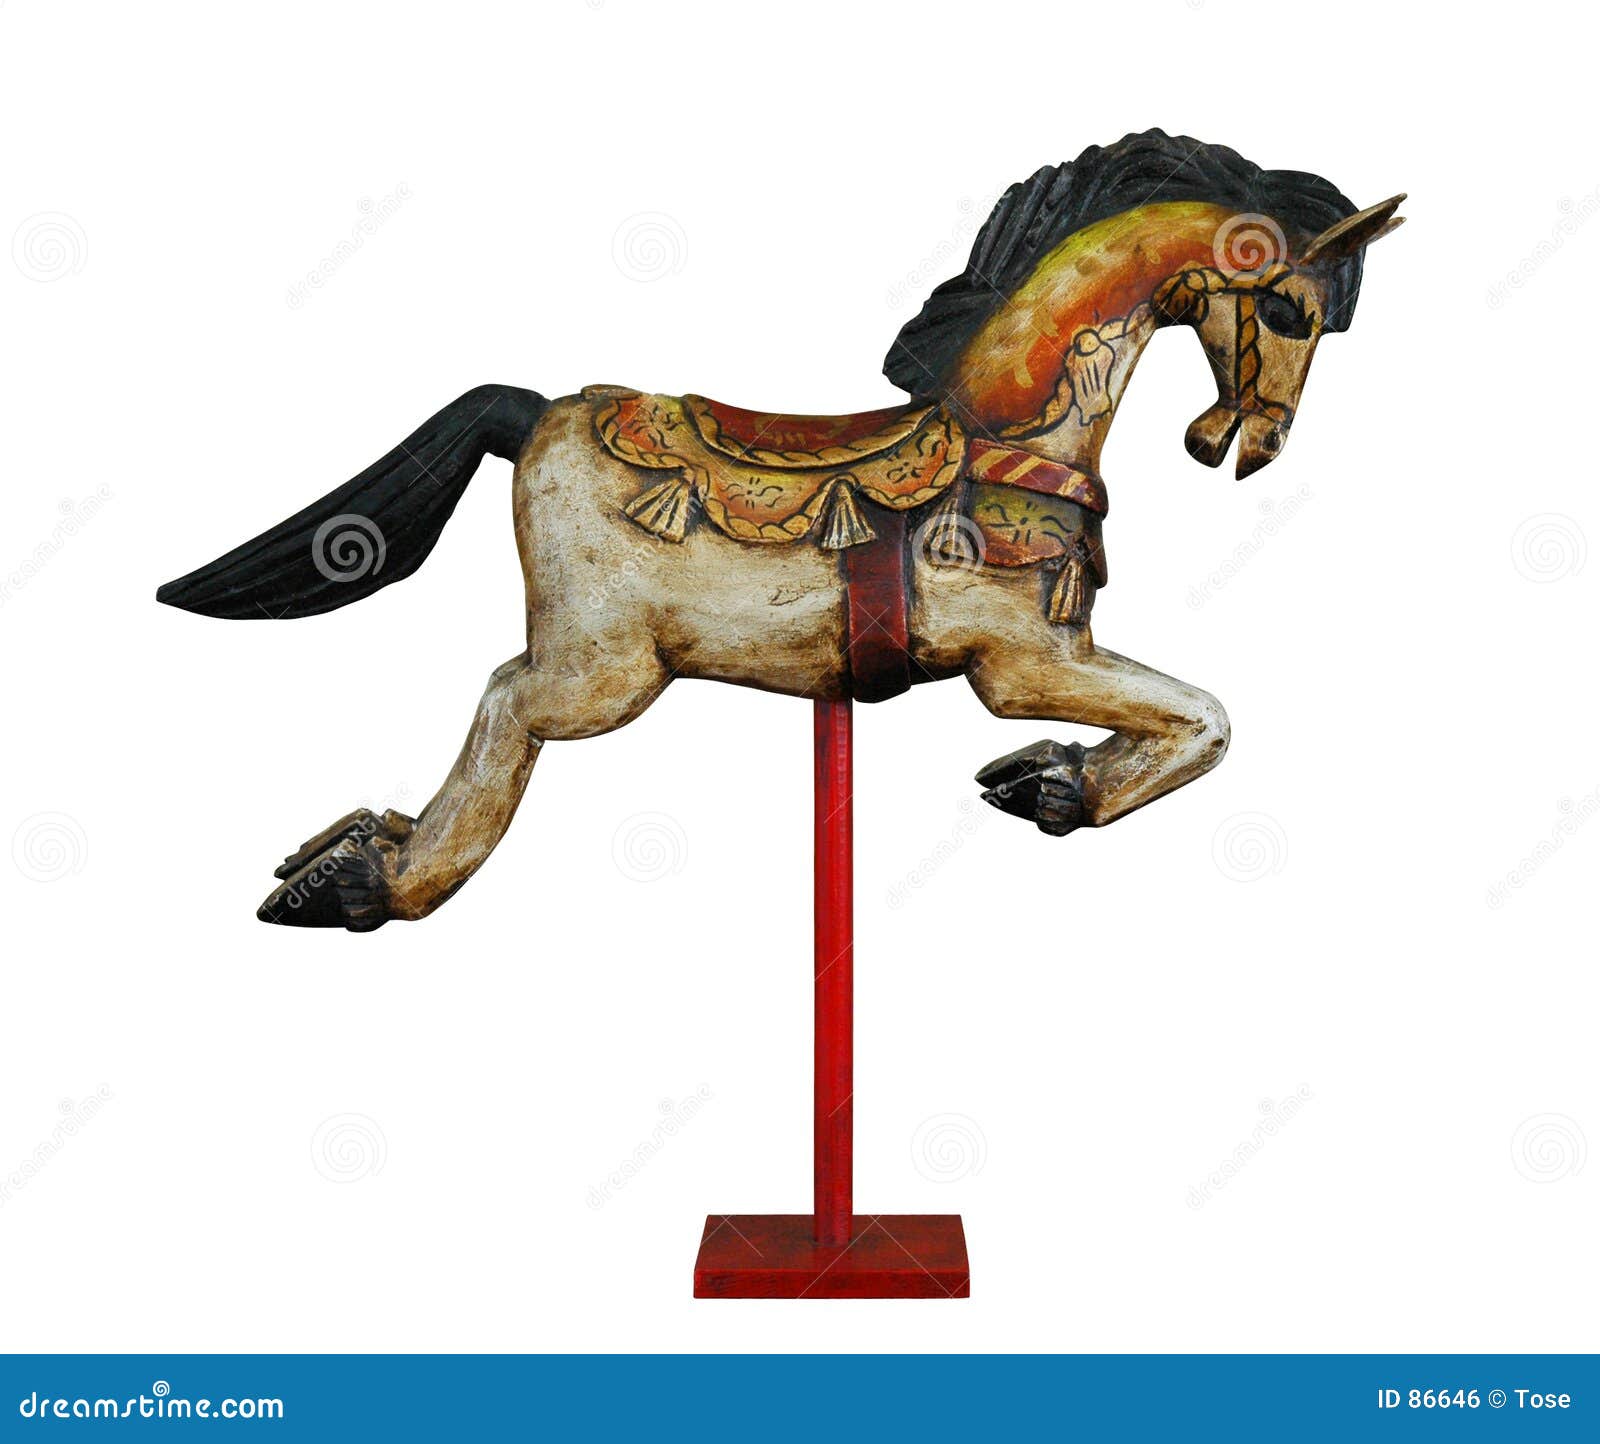 Wooden Horse Royalty Free Stock Image - Image: 86646